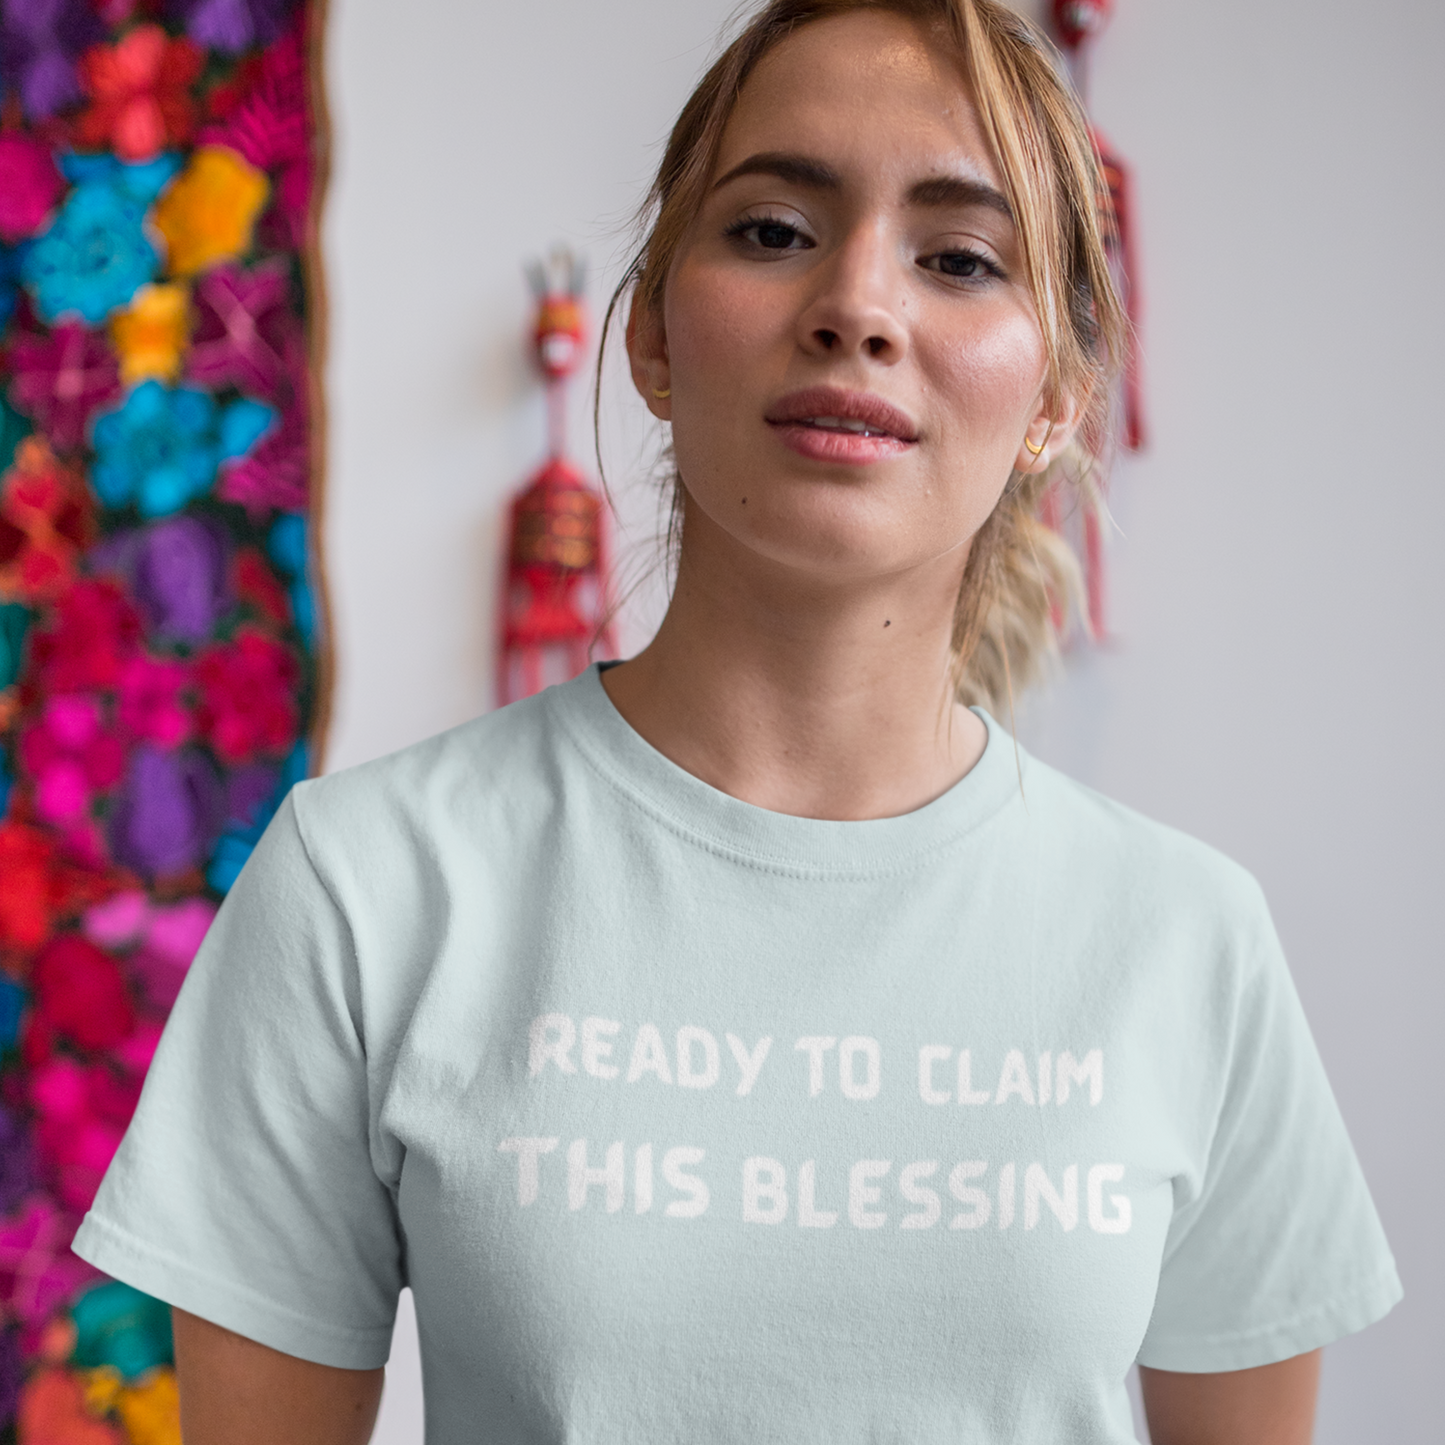 Ready to claim this blessing unisex inspirational words tee shirt T shirt gift expressing gratitude. ( White font)